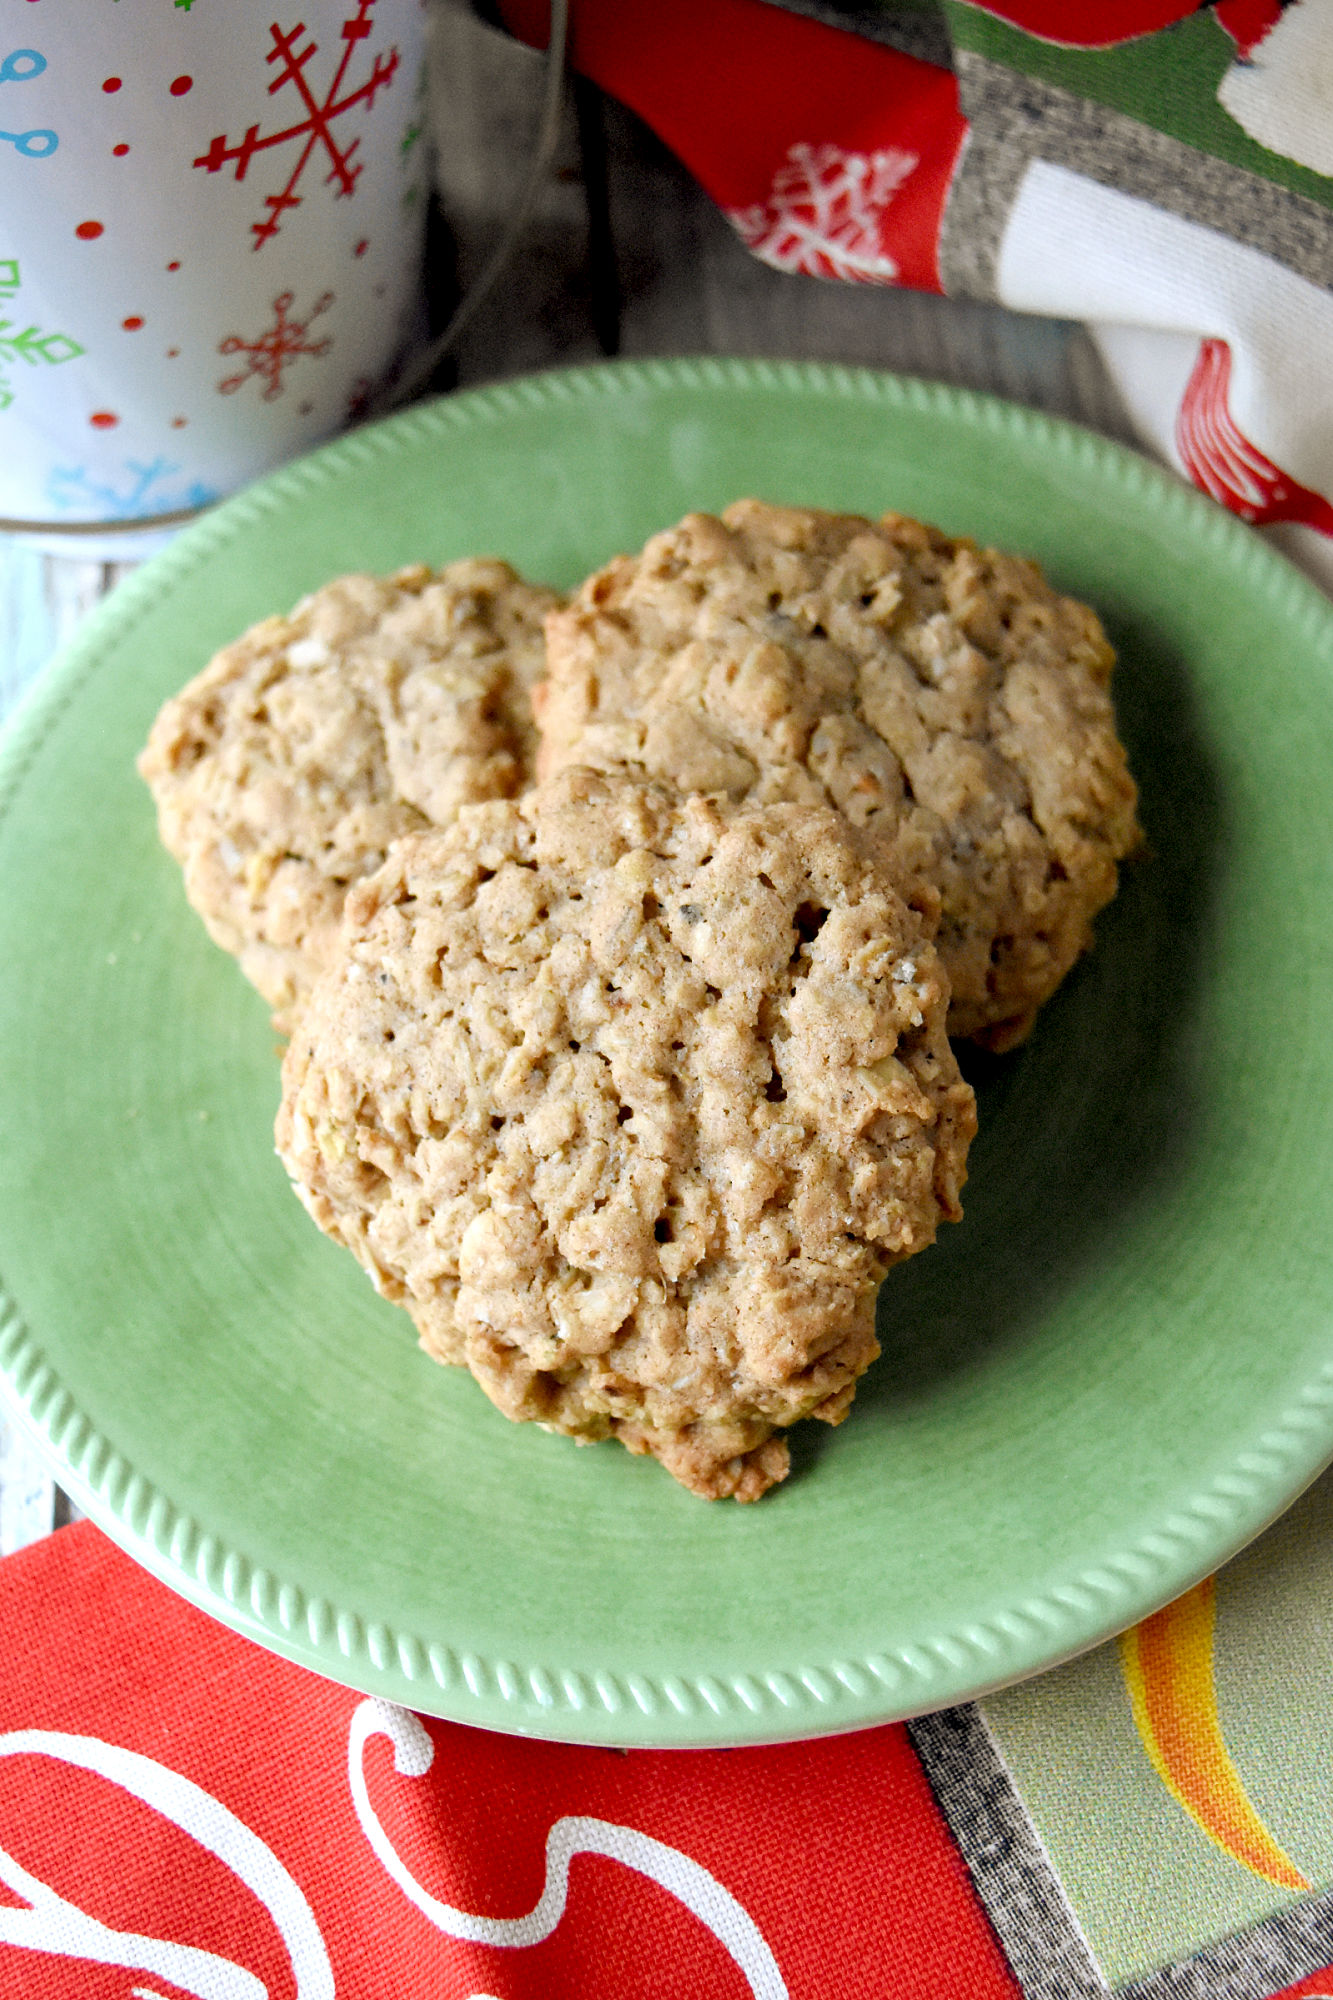 Double Ginger Oatmeal Cookies have two kinds of ginger in them for two times the delicious ginger oatmeal flavor.  There’s freshly ground ginger and chopped stem ginger.   #ChristmasCookies #stemginger #oatmealcookies #gingercookies #doubleginger